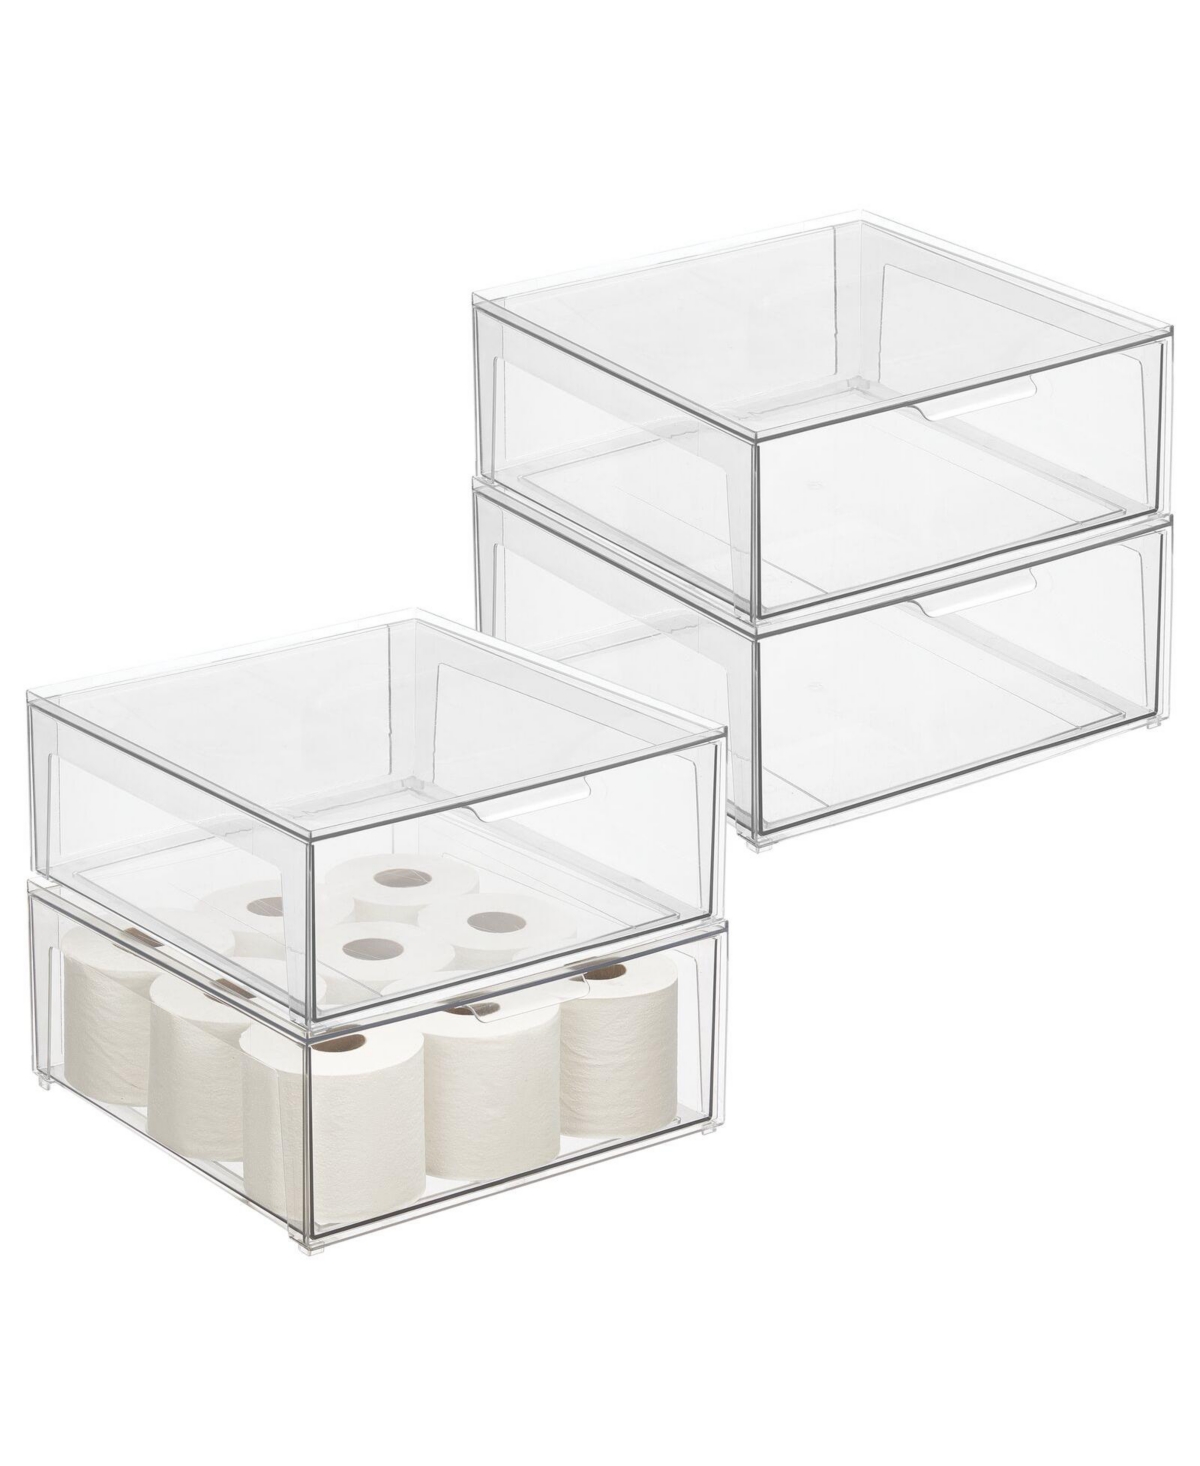 Plastic Stackable Bathroom Storage Organizer with Drawer, Medium - 4 Pack - Clear